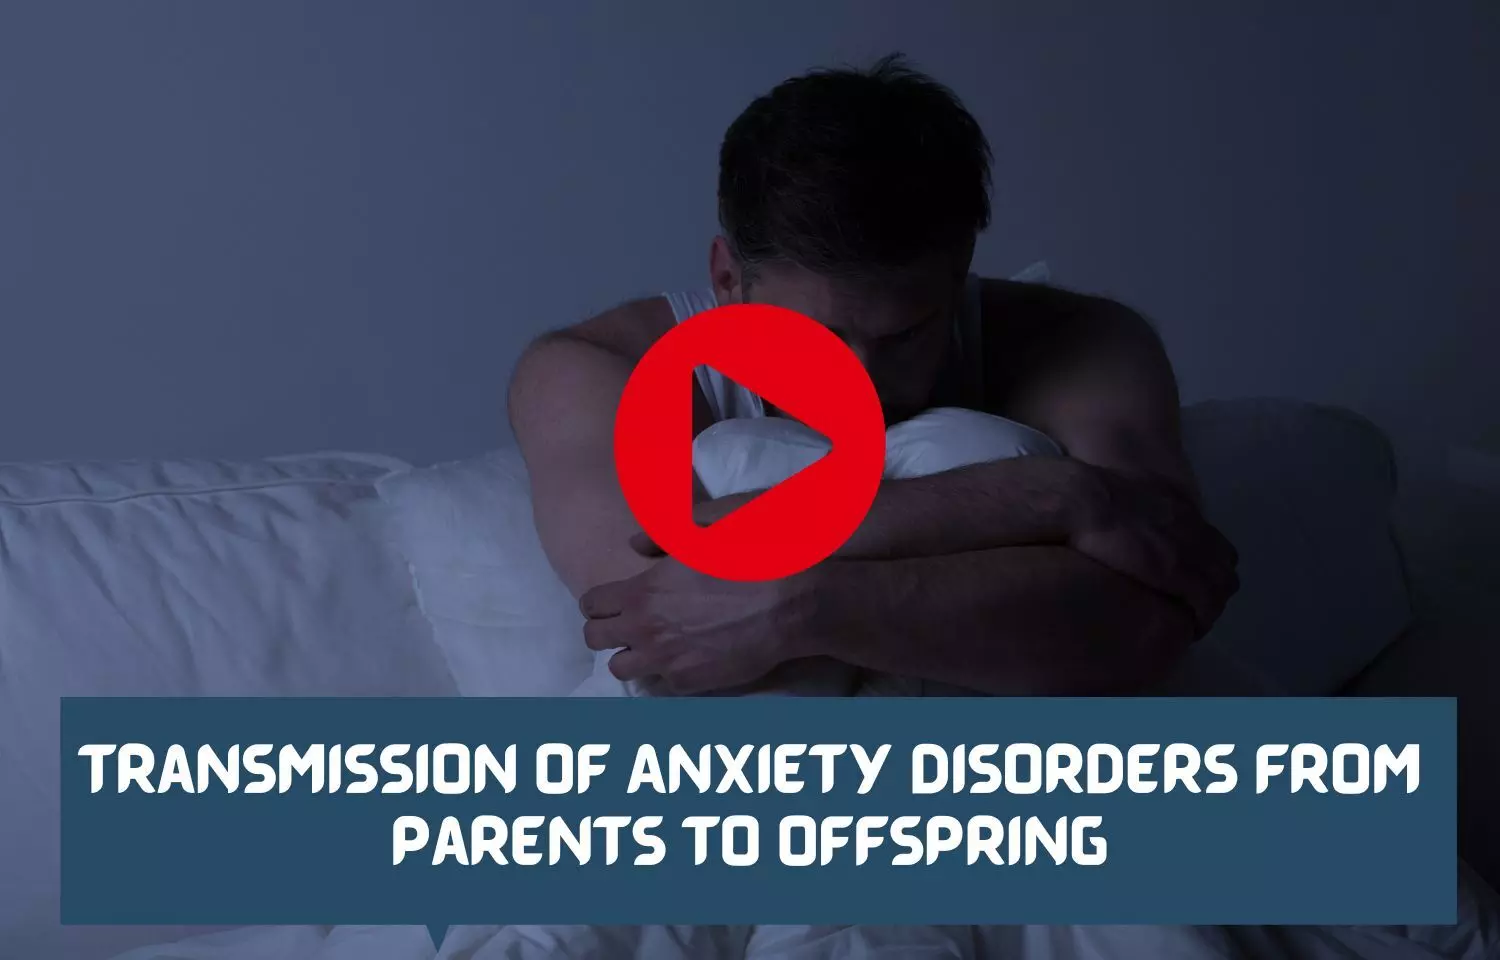 Transmission of Anxiety Disorders From Parents to Offspring